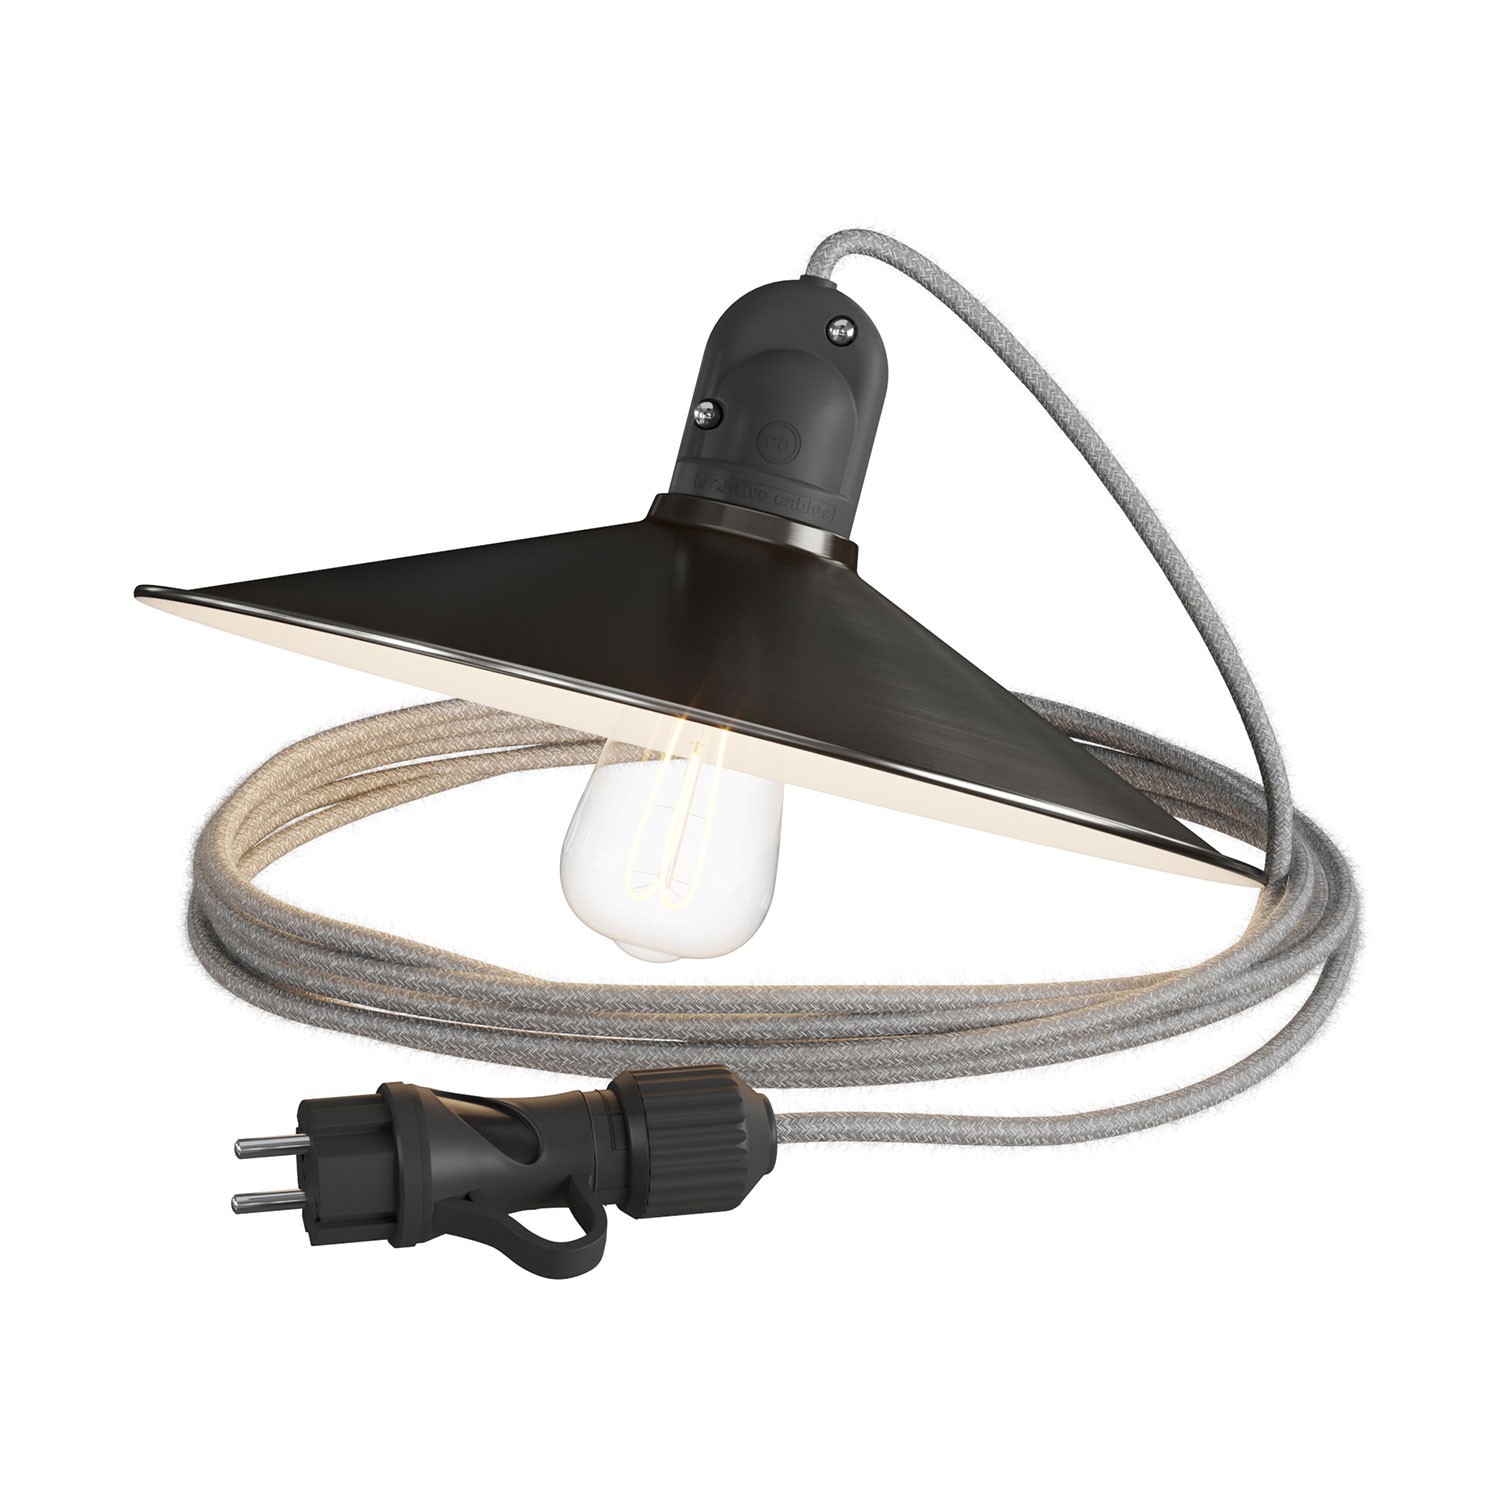 Eiva Snake with Swing shade, portable outdoor lamp, 5 m textile cable, IP65 waterproof lampholder and plug